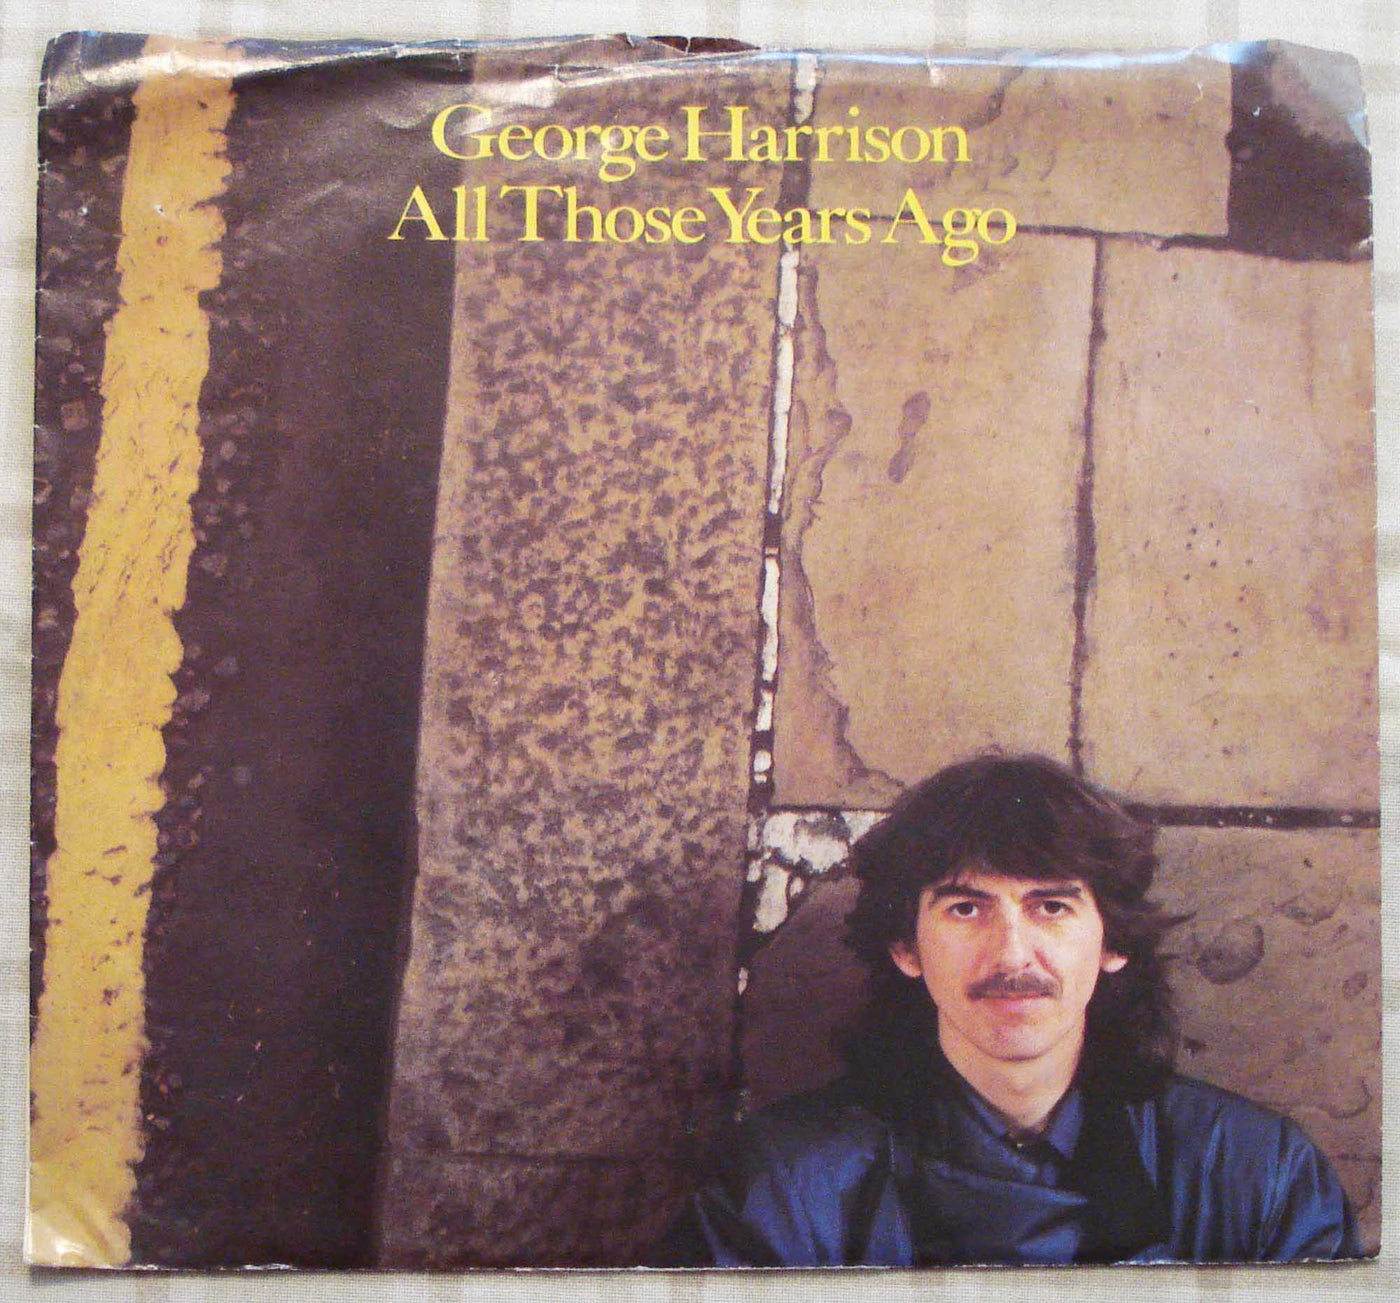 George Harrison - All Those Years Ago-Writing's On The Wall (1981) Vinyl Single 45rpm DRC49725